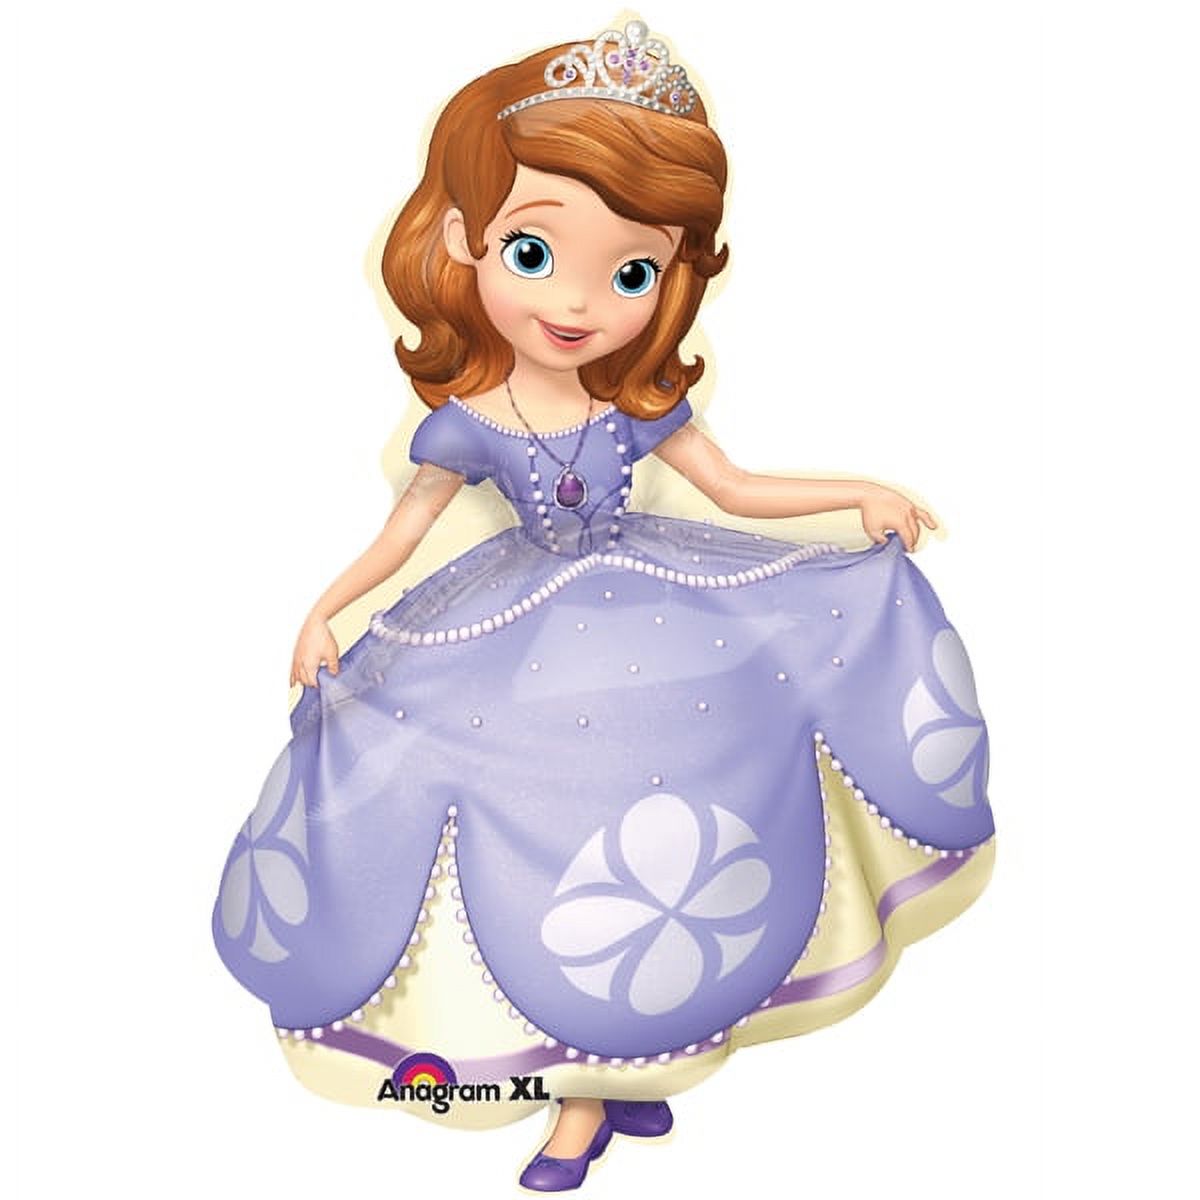 Sofia the First Shaped Balloon, 35" - image 1 of 2